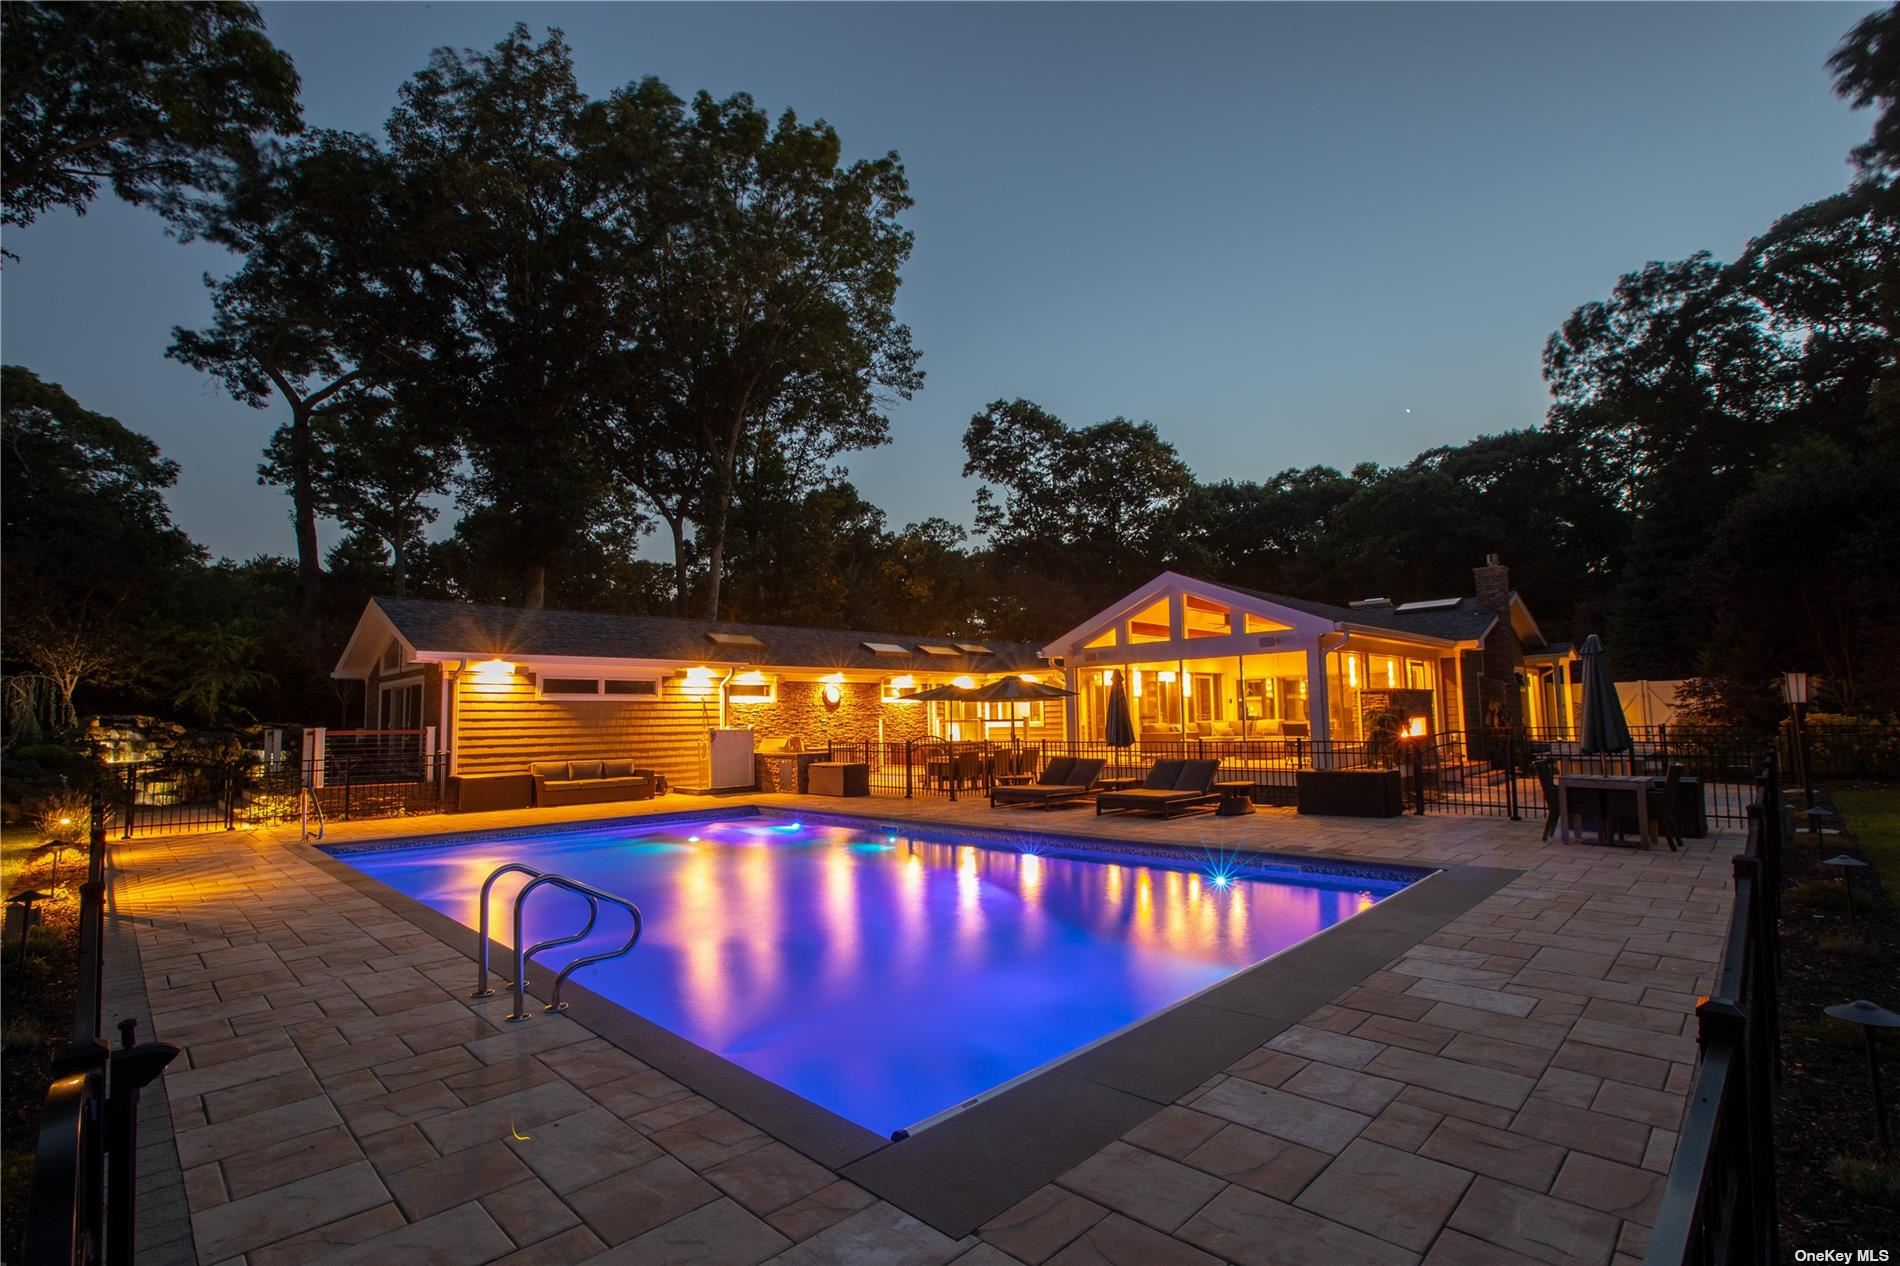 Property for Sale at 49 Branch Drive, Smithtown, Hamptons, NY - Bedrooms: 5 
Bathrooms: 4  - $1,950,000